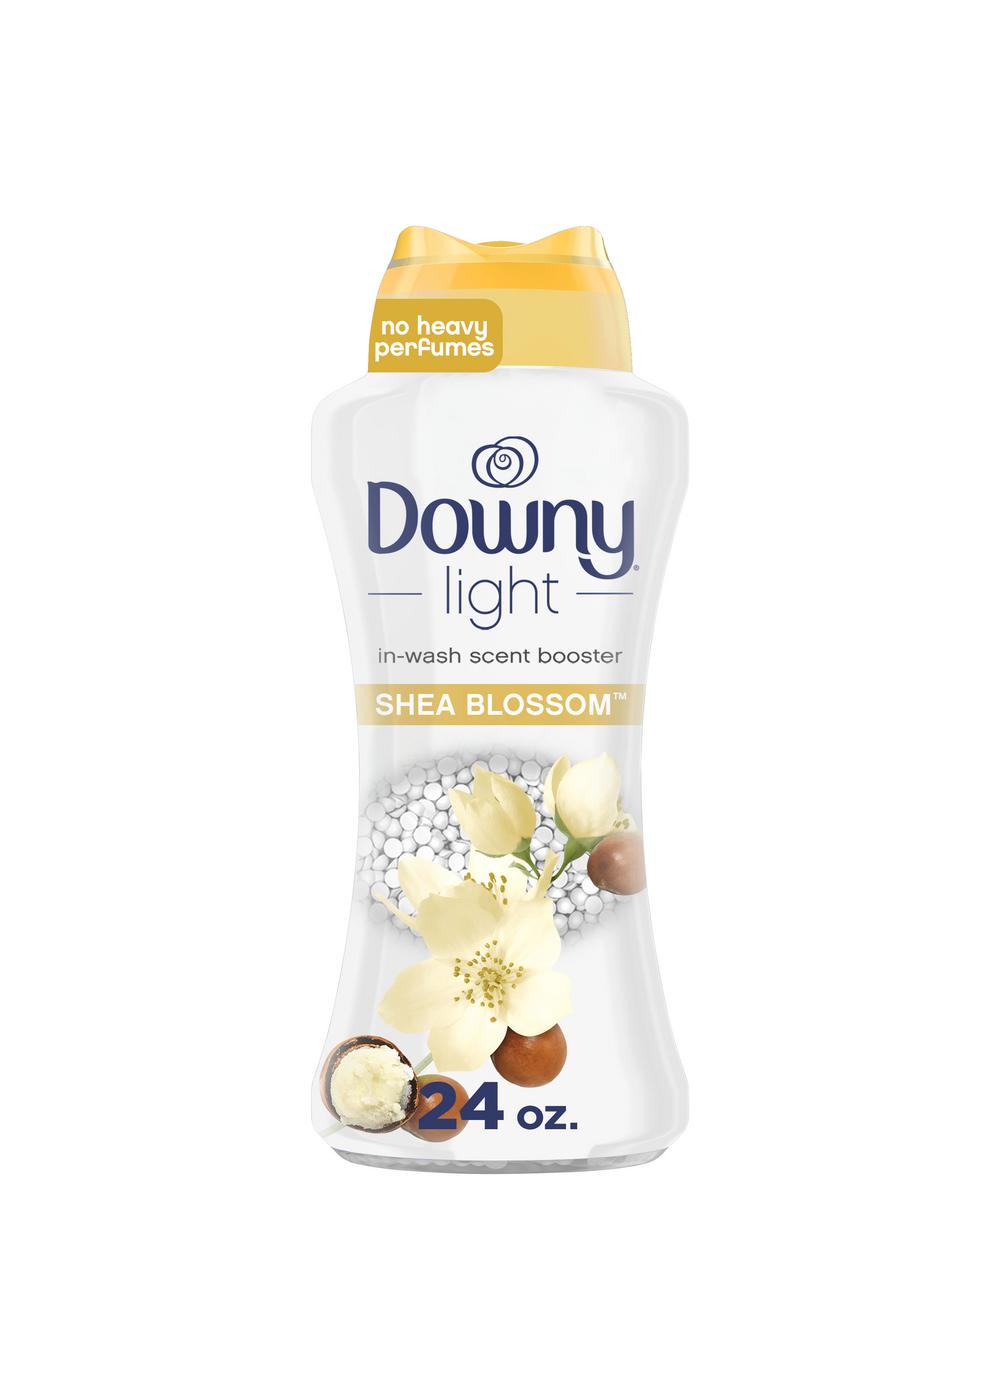 Downy Light In-Wash Scent Booster - Shea Blossom; image 1 of 9